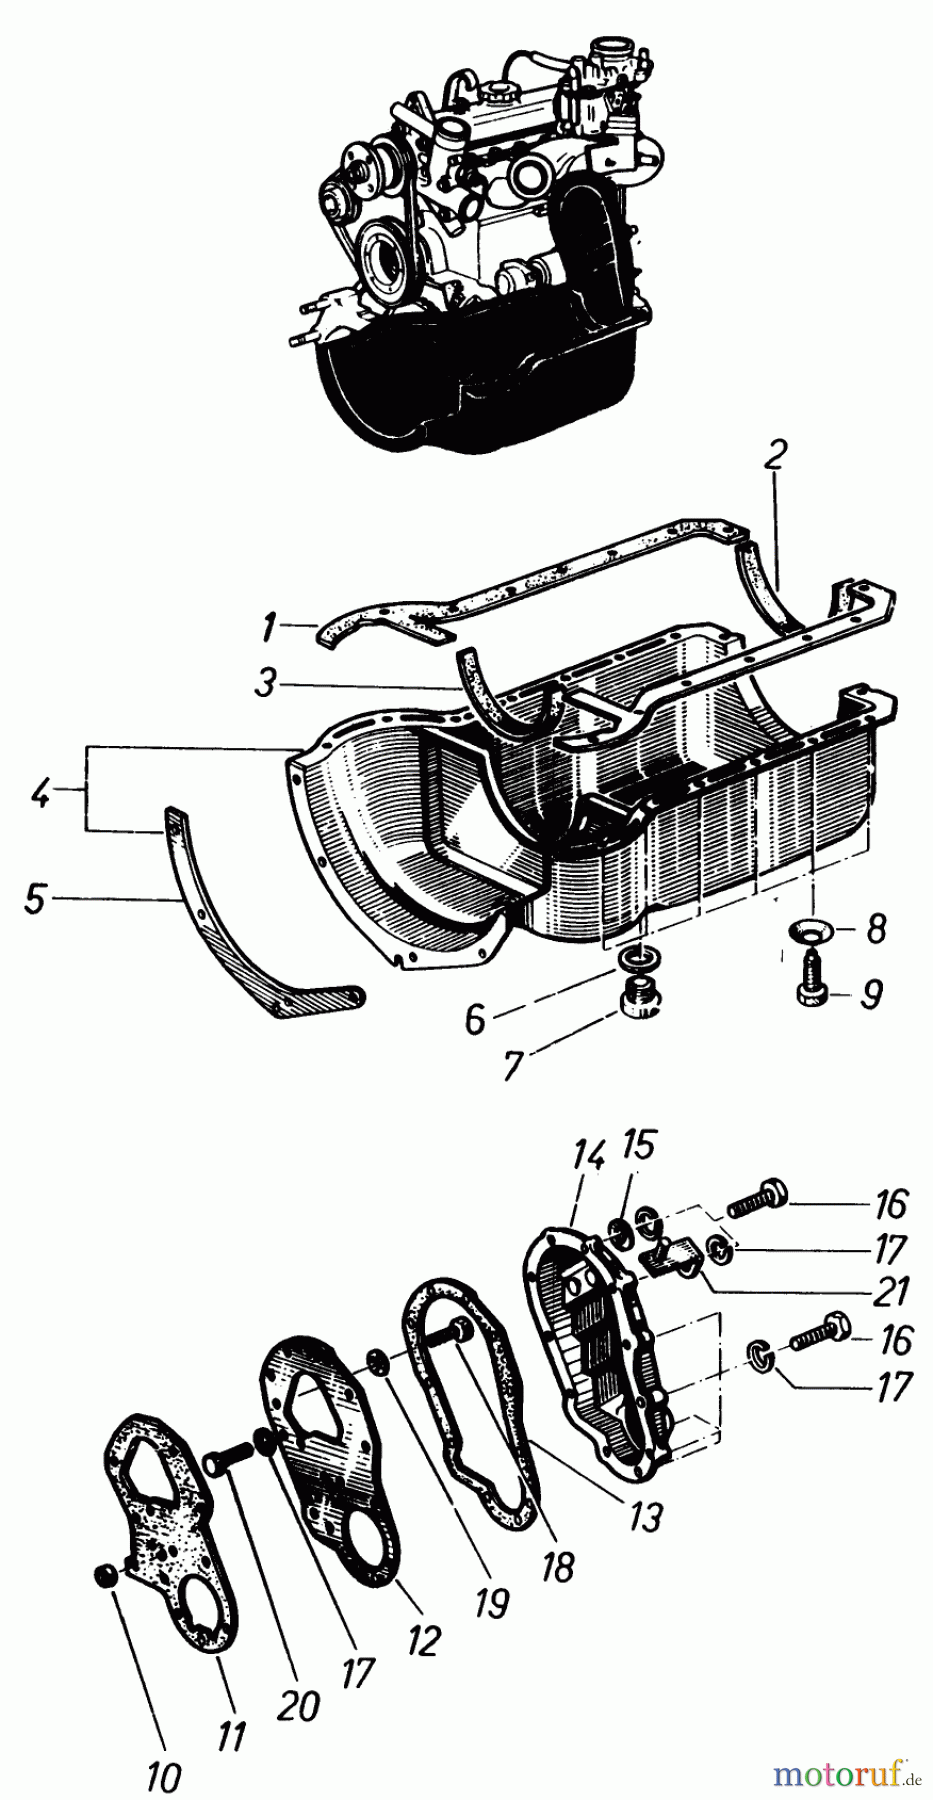  Toro Neu Mowers, Lawn & Garden Tractor Seite 2 91-20RG01 (D-250) - Toro D-250 10-Speed Tractor, 1979 OIL PAN AND TIMING CHAIN COVER